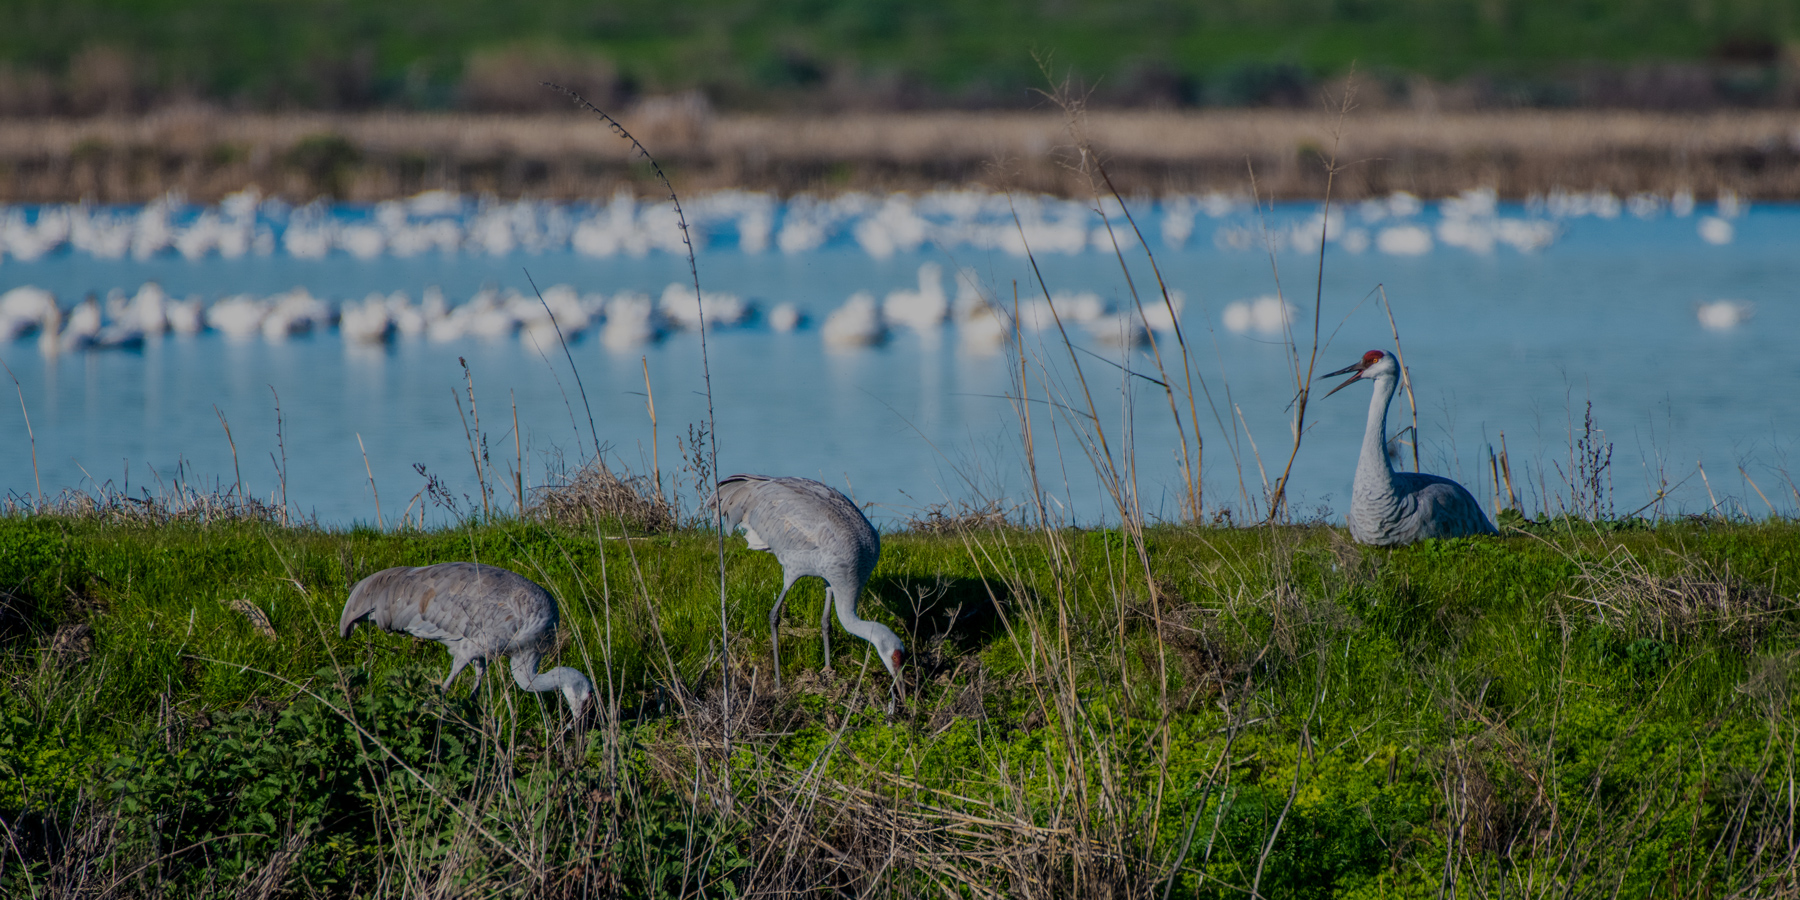 Birds search for food in a wetland area.